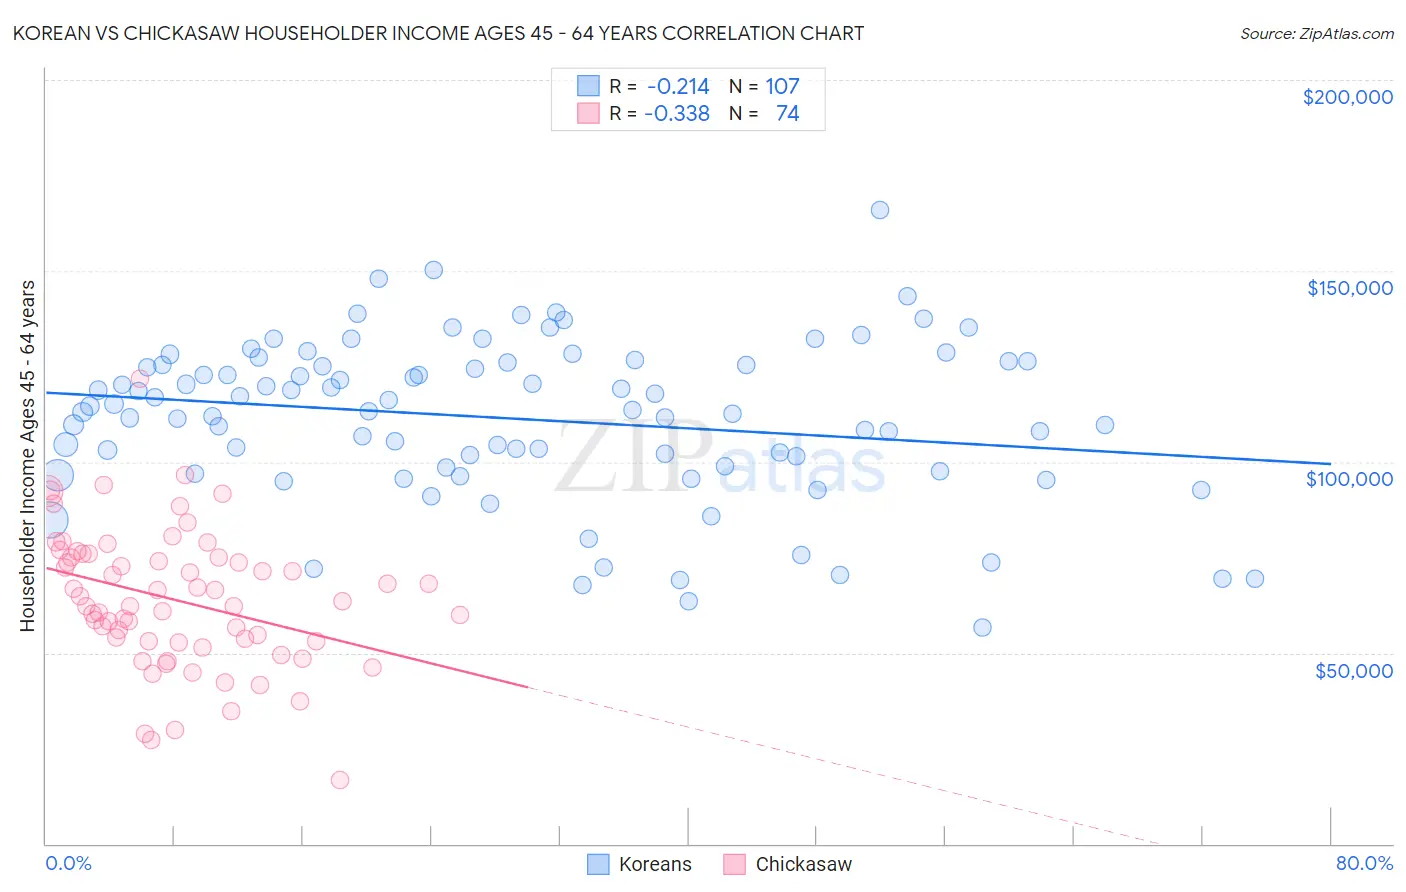 Korean vs Chickasaw Householder Income Ages 45 - 64 years